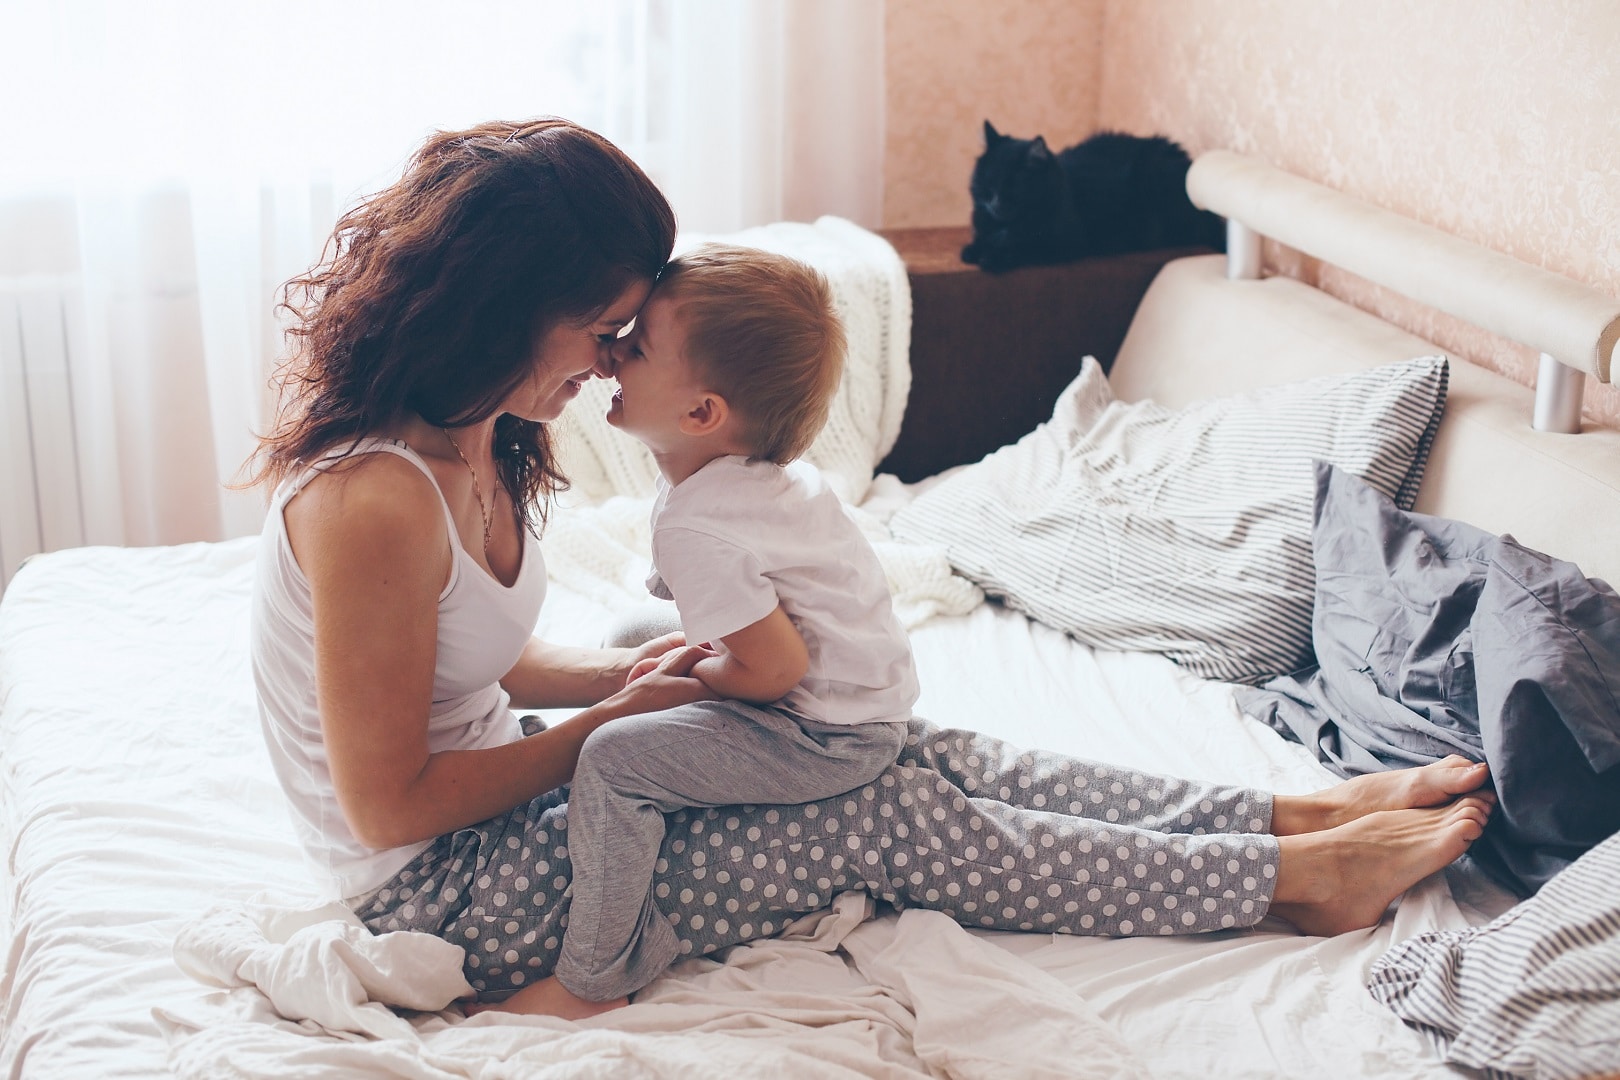 Parents Of Toddlers Have Sex An Average of 0 Times Per Month - Best 7 Tips To Keep Your Kids Healthy